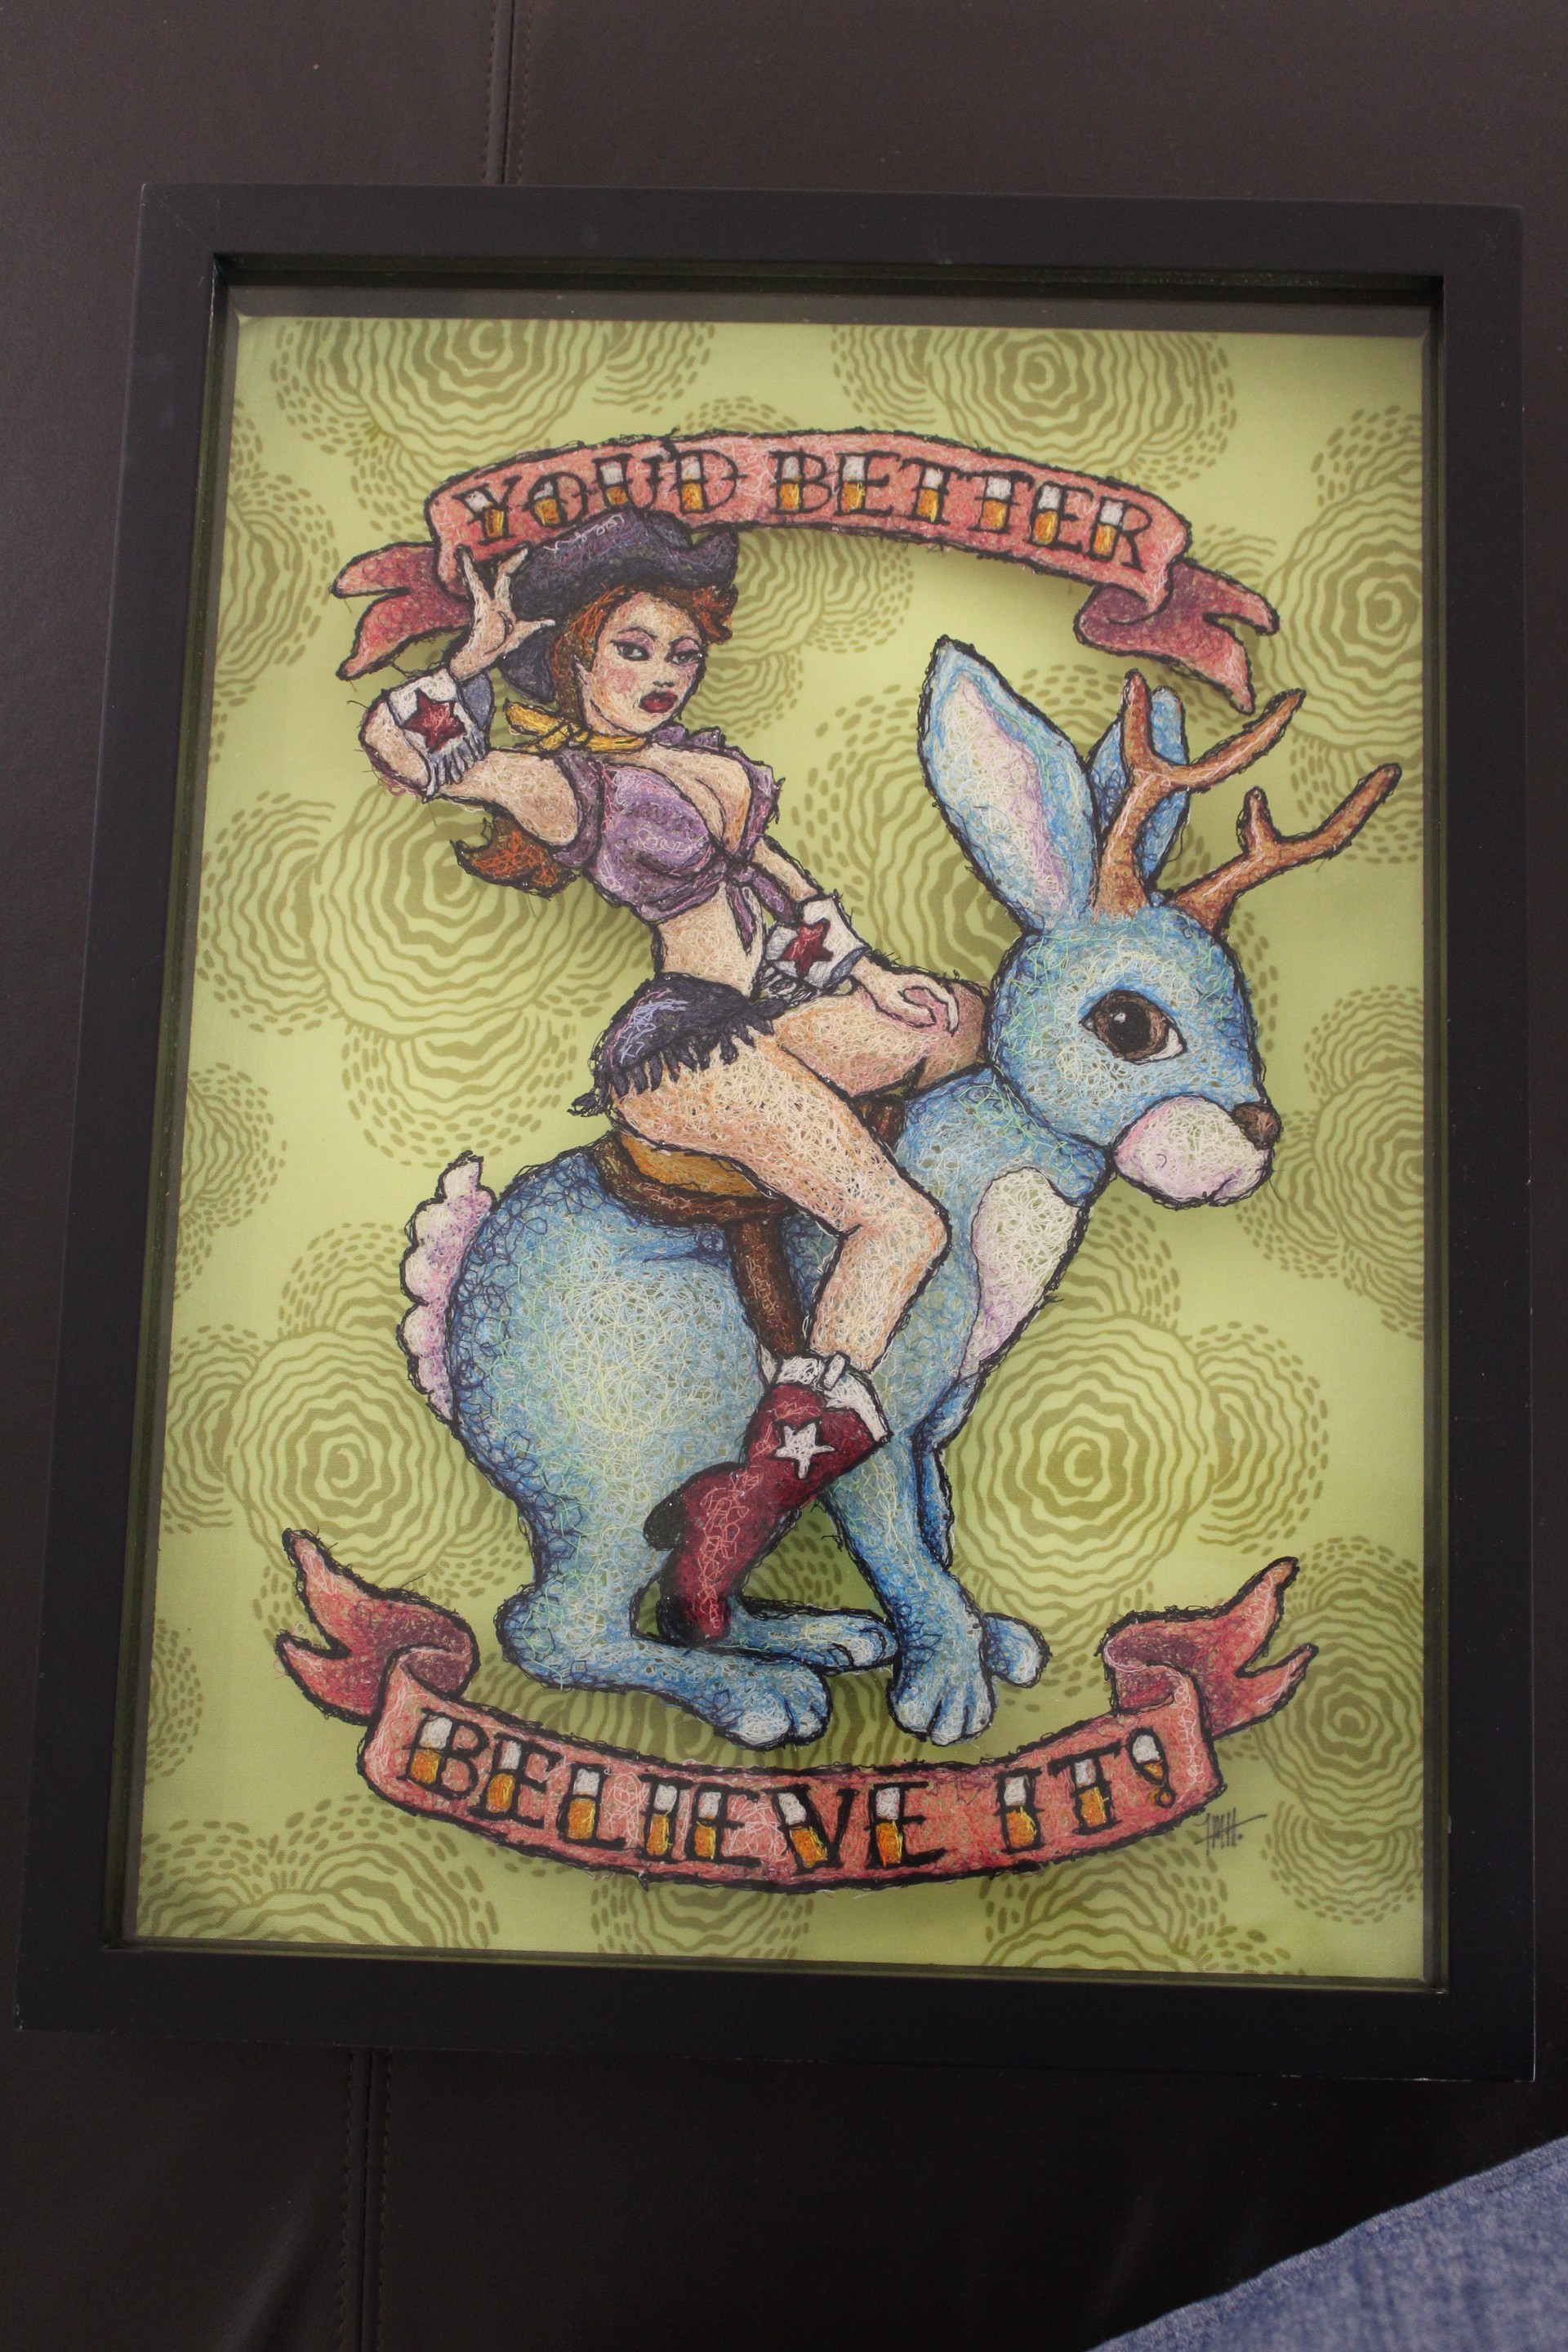 Jackalope Girl / You'd Better Believe It! by Theresa Honeywell